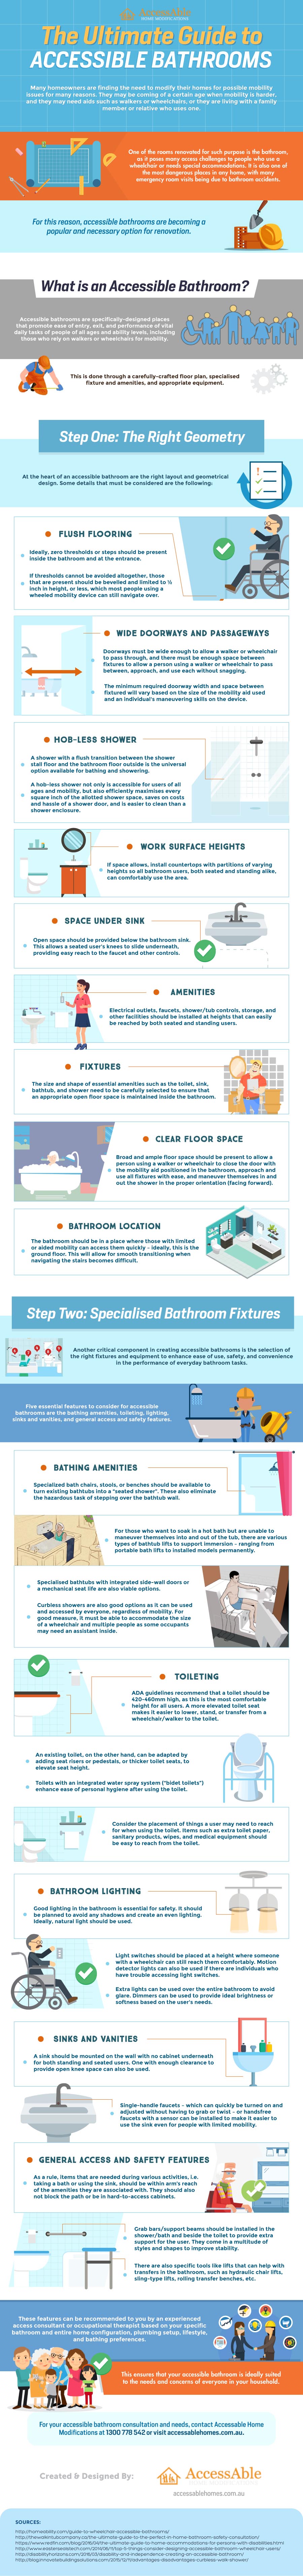 The Ultimate Guide to Accessible Bathrooms